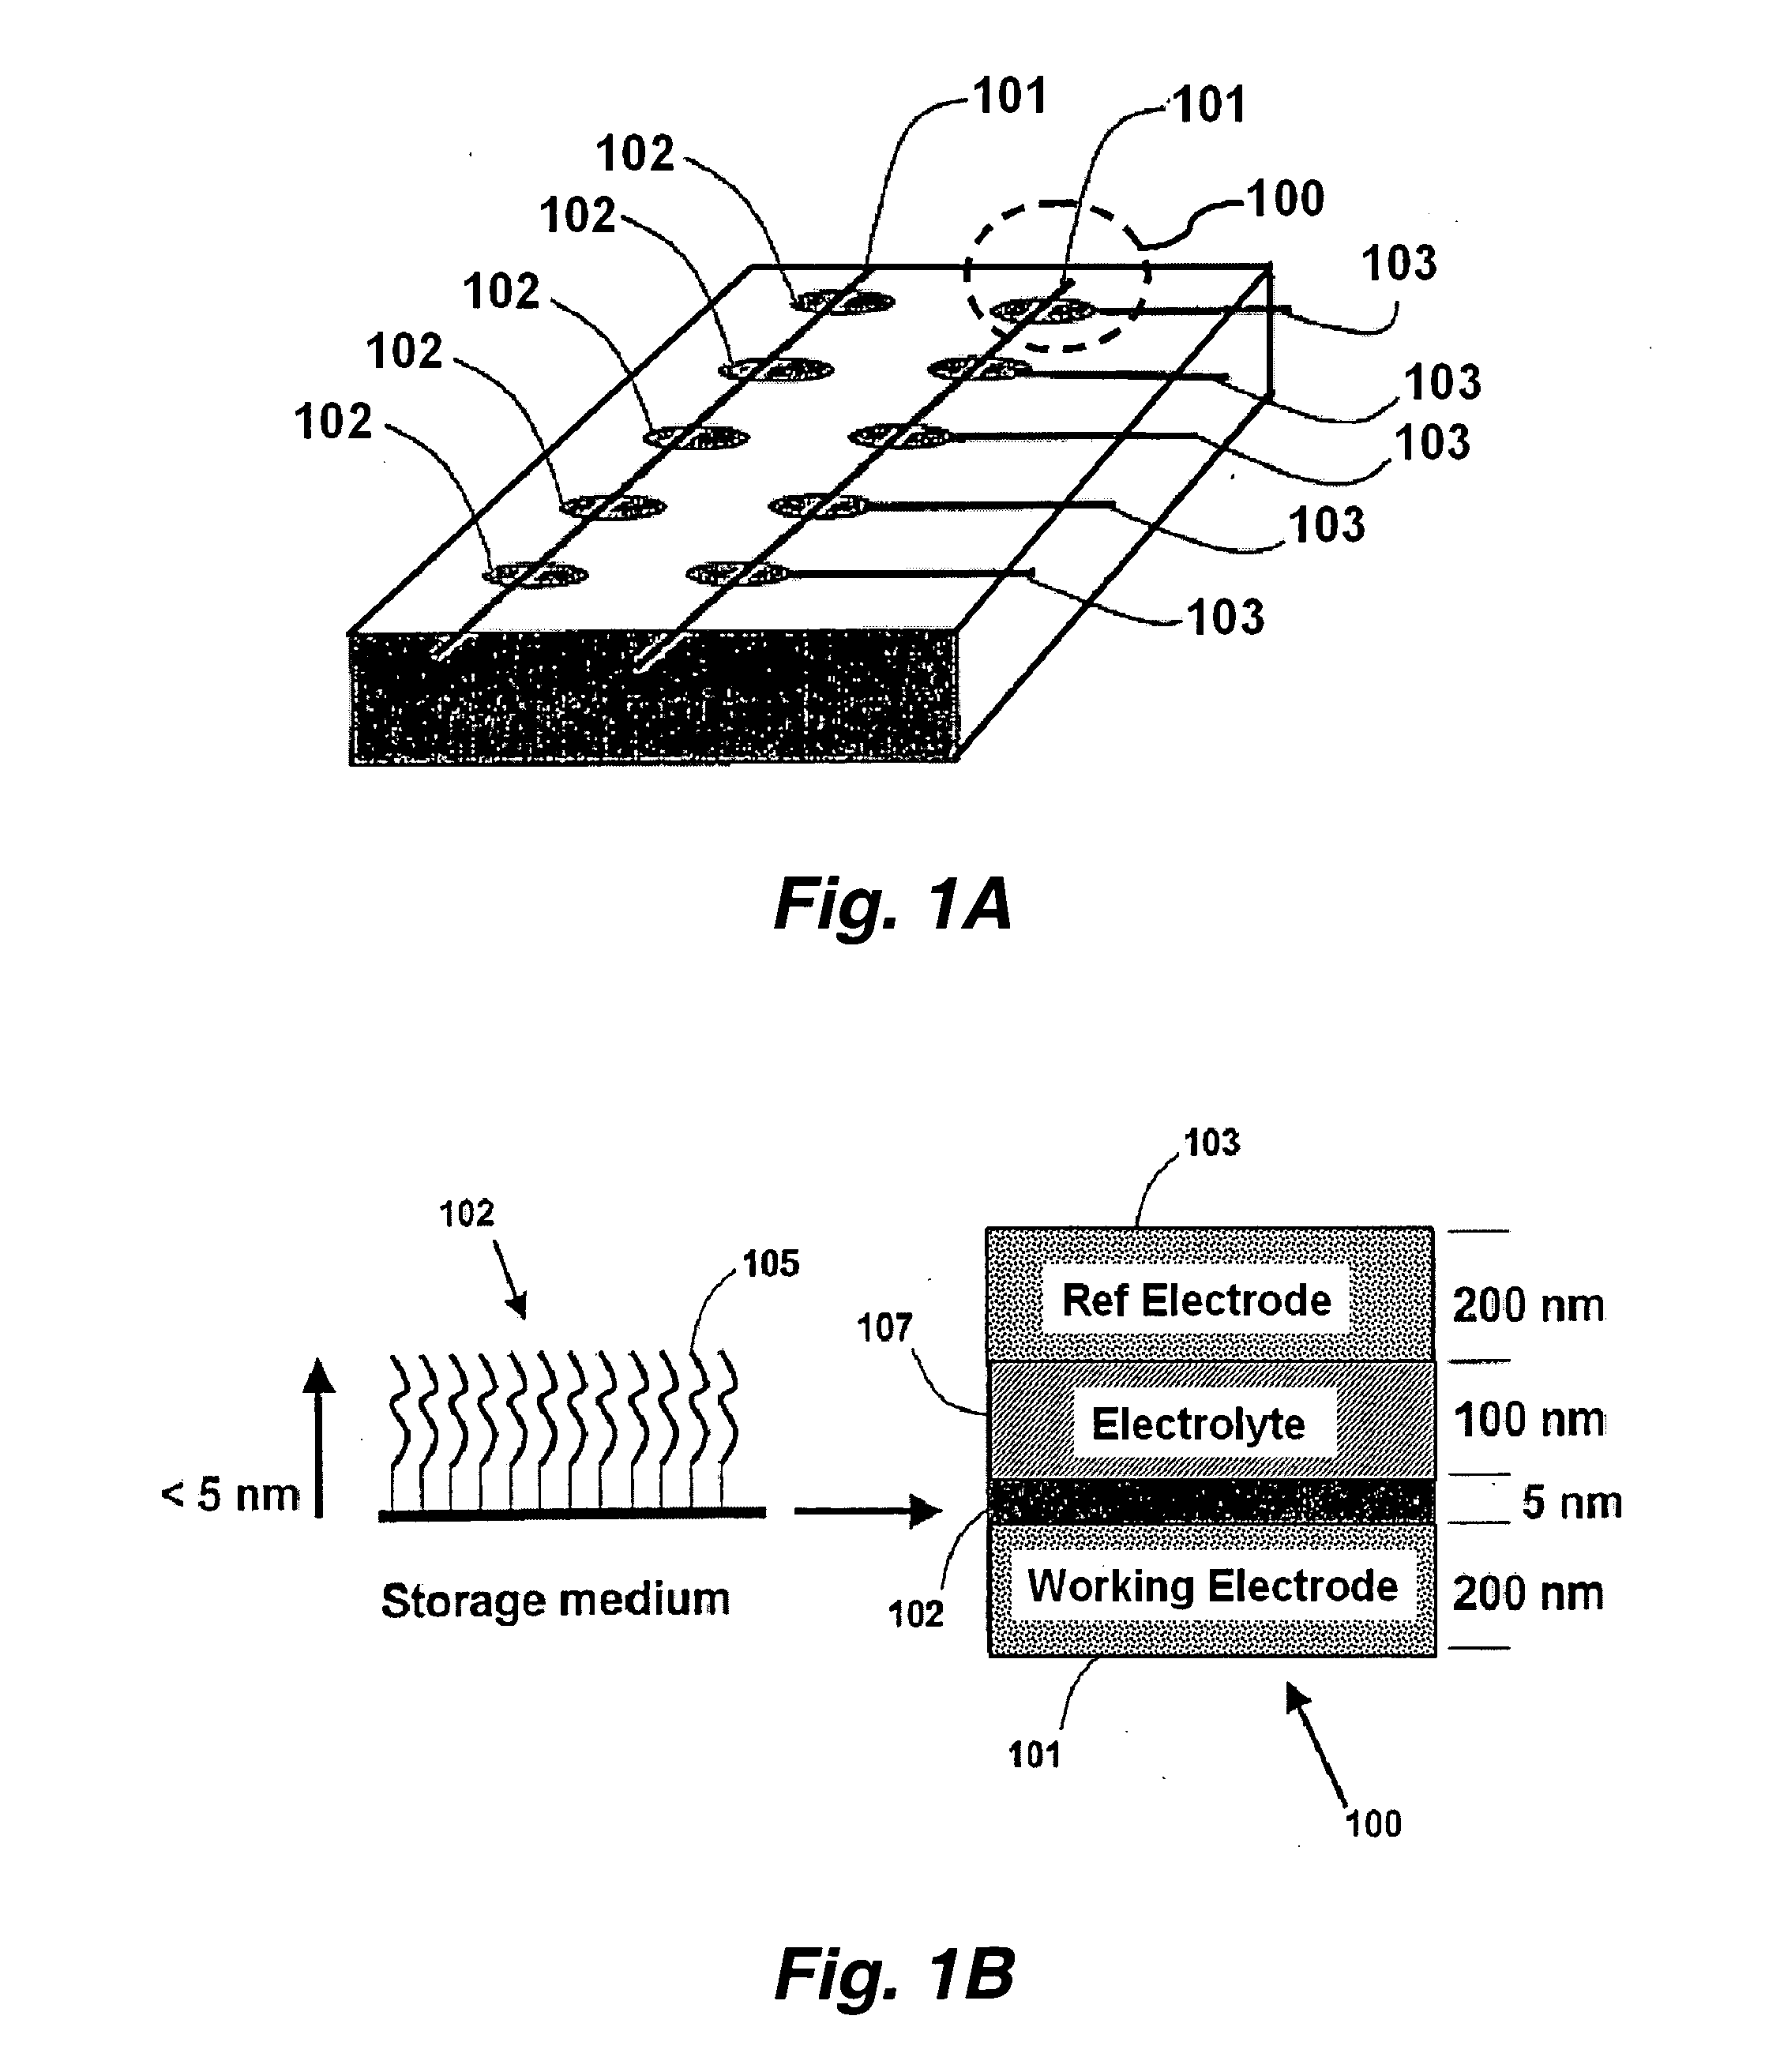 Situ patterning of electrolyte for molecular information storage devices